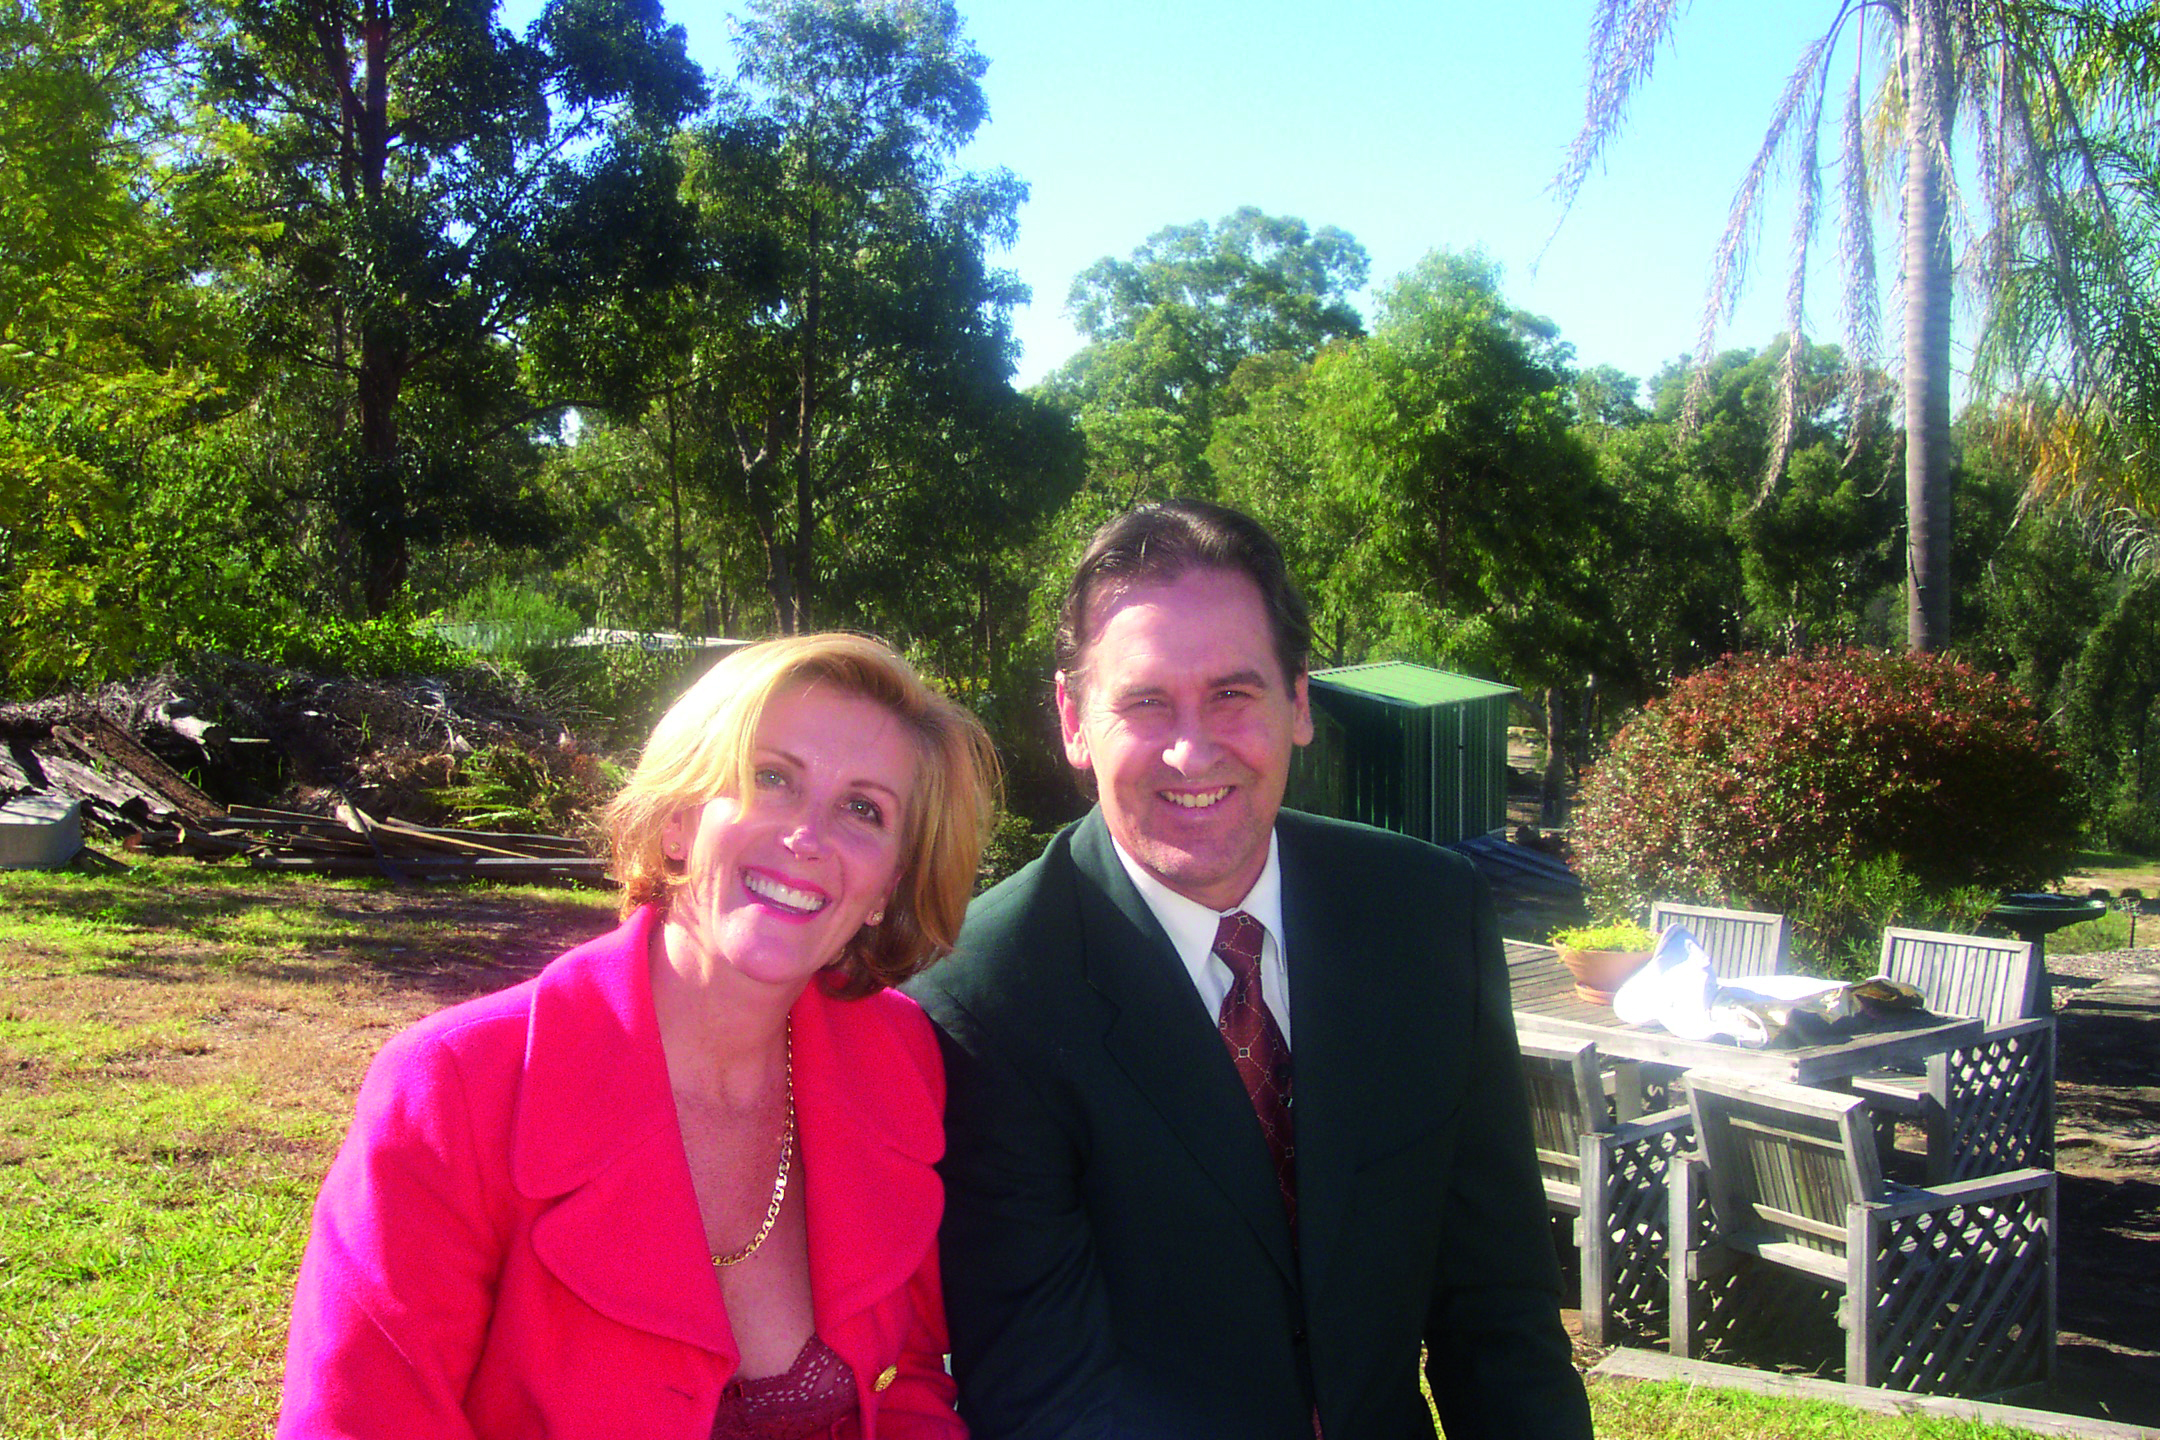 Hosts Shelley Sykes and Kieren Revell on location for TV Show Health Wealth & Happiness